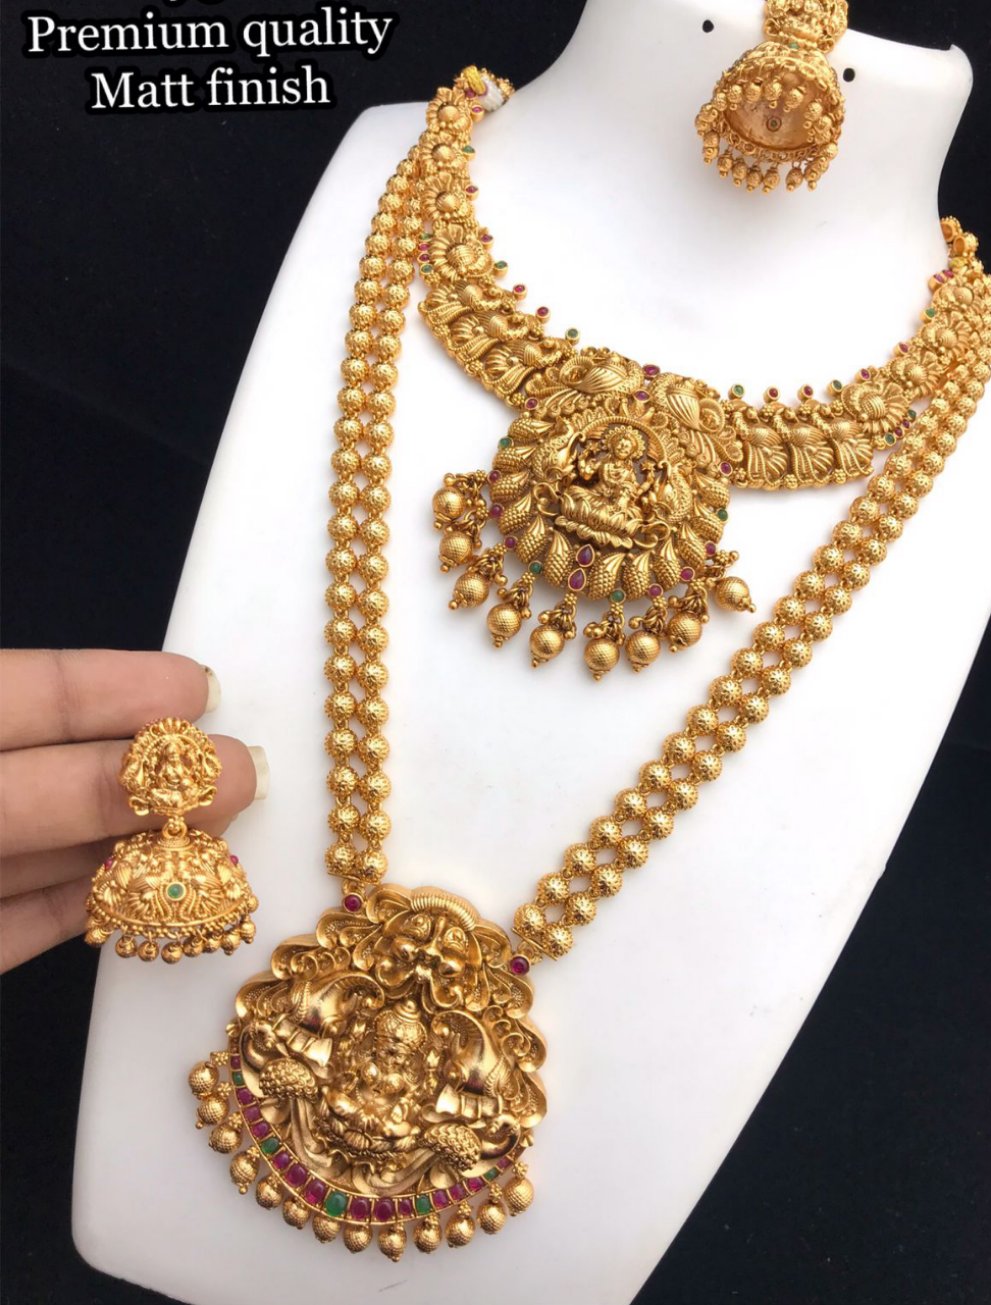 Neckset (short and long) with Jhumkas